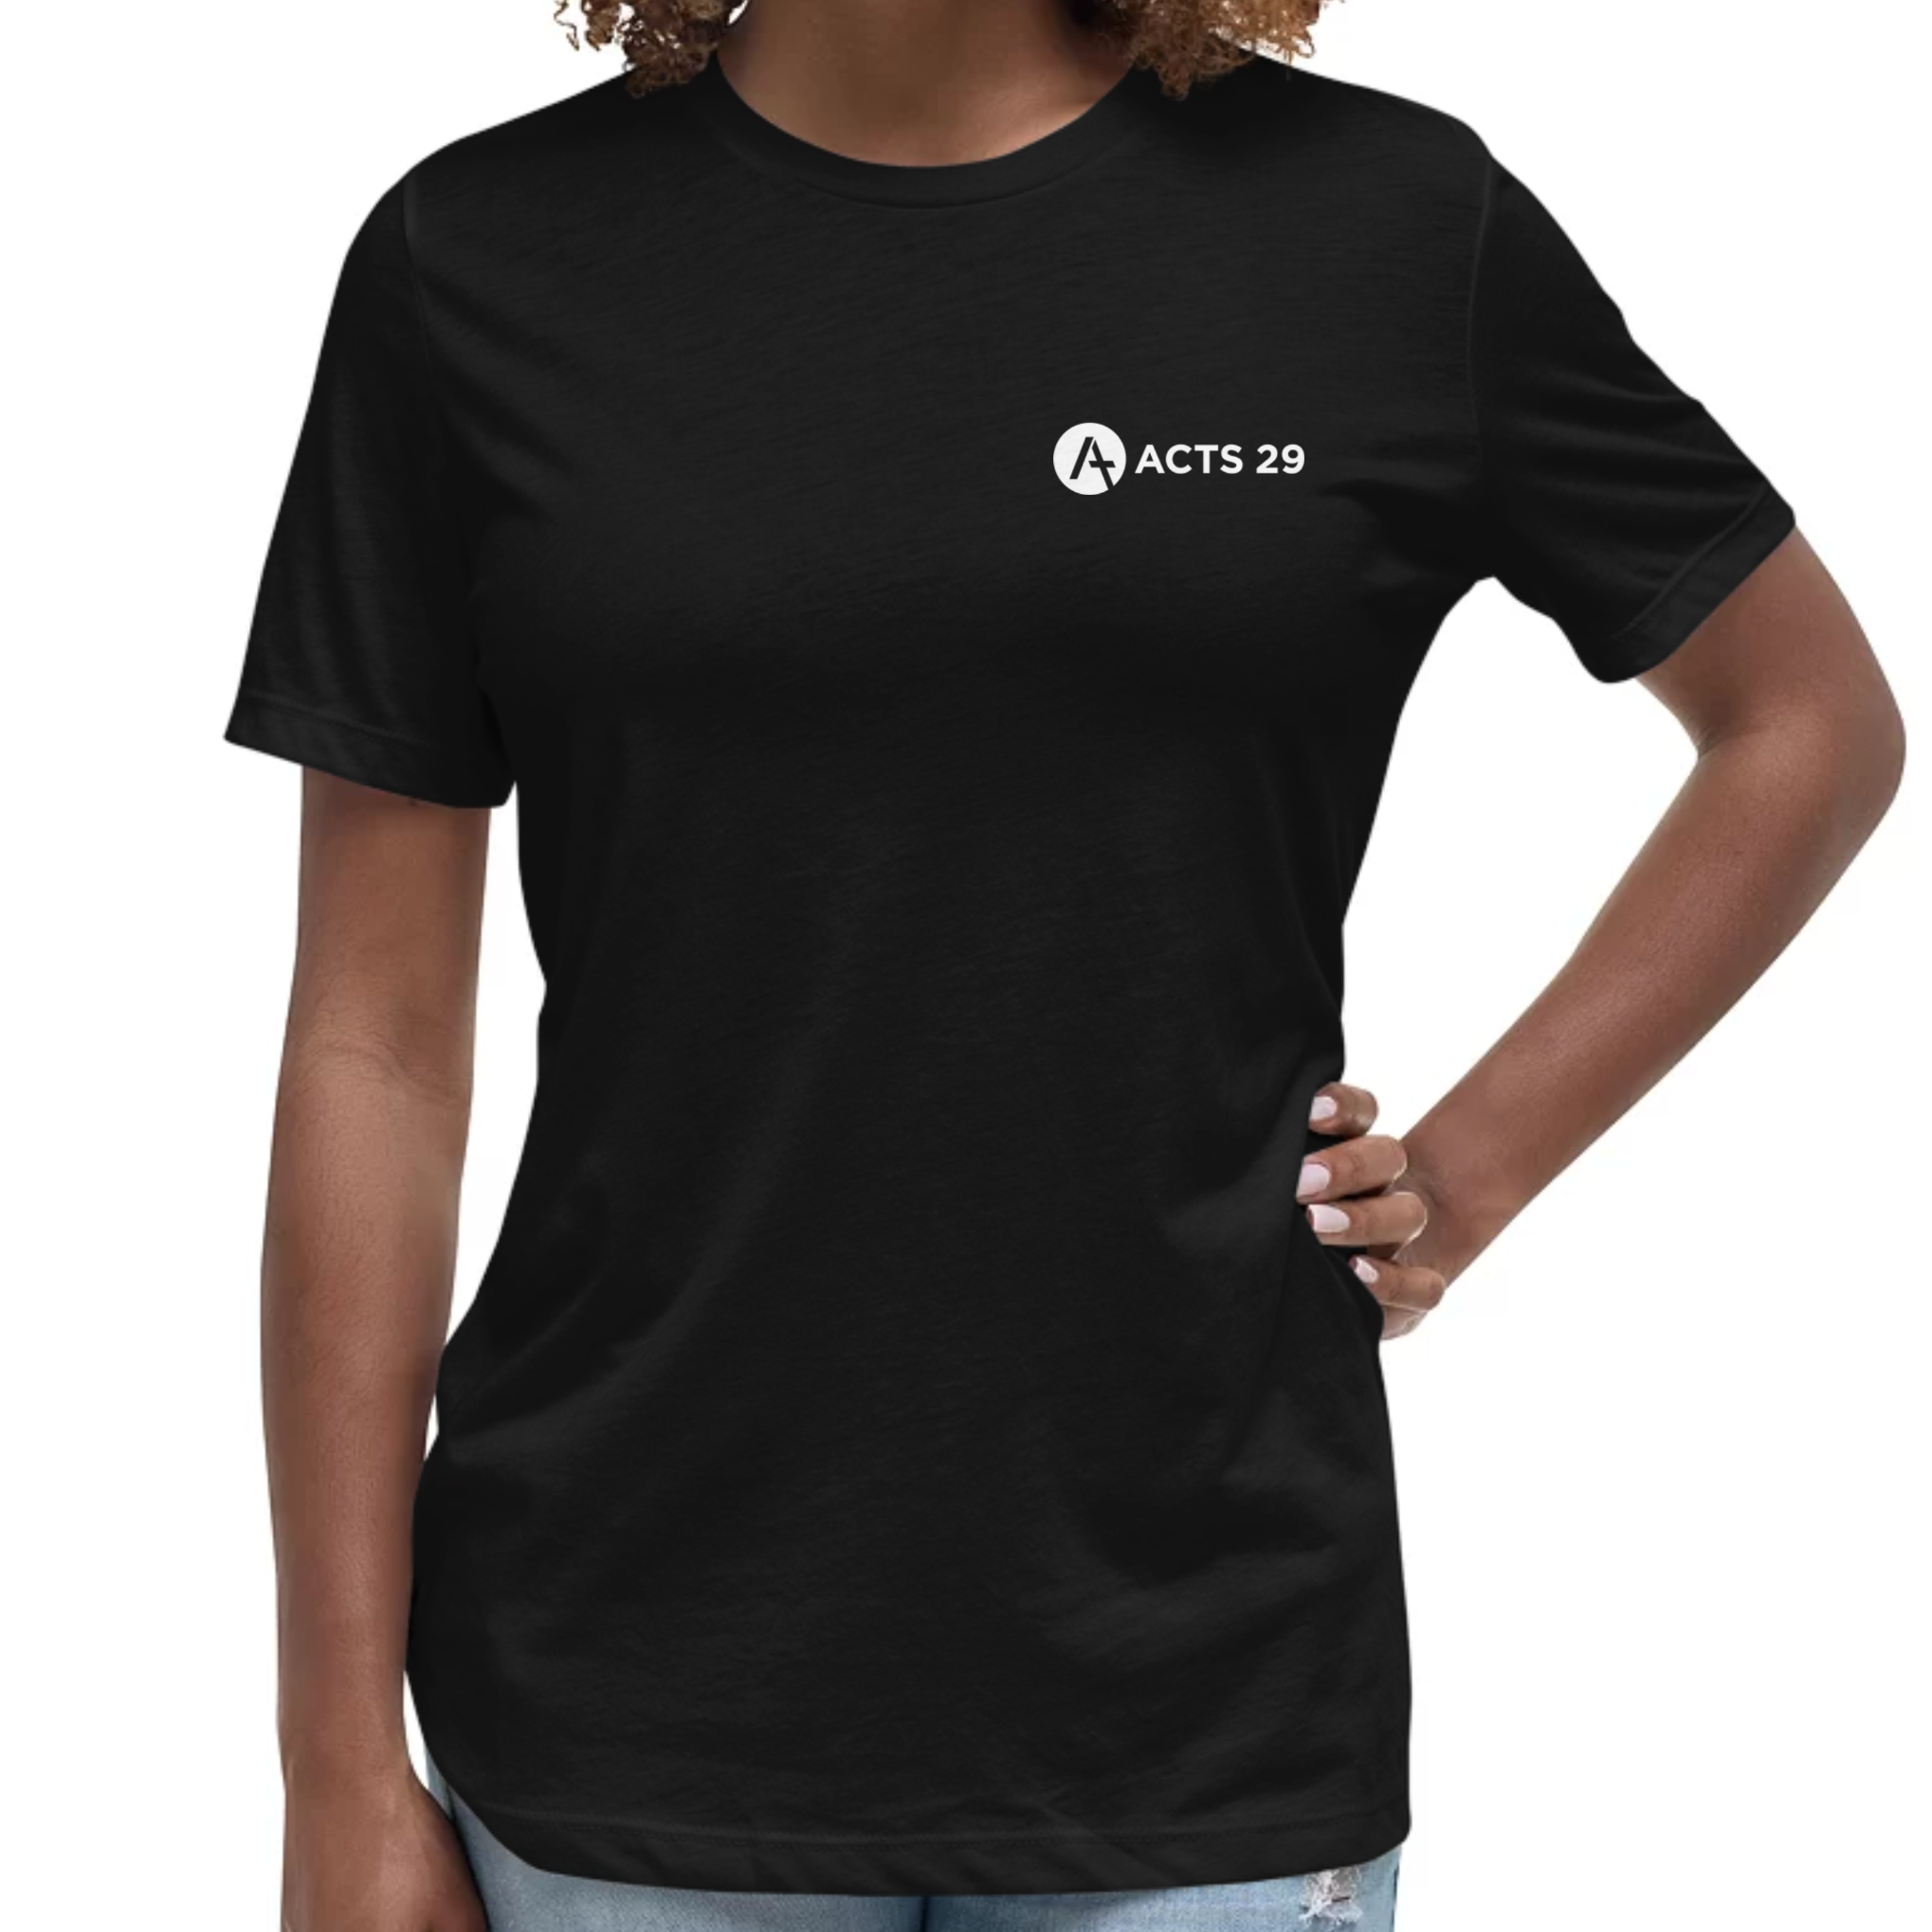 ACTS29 T Shirt